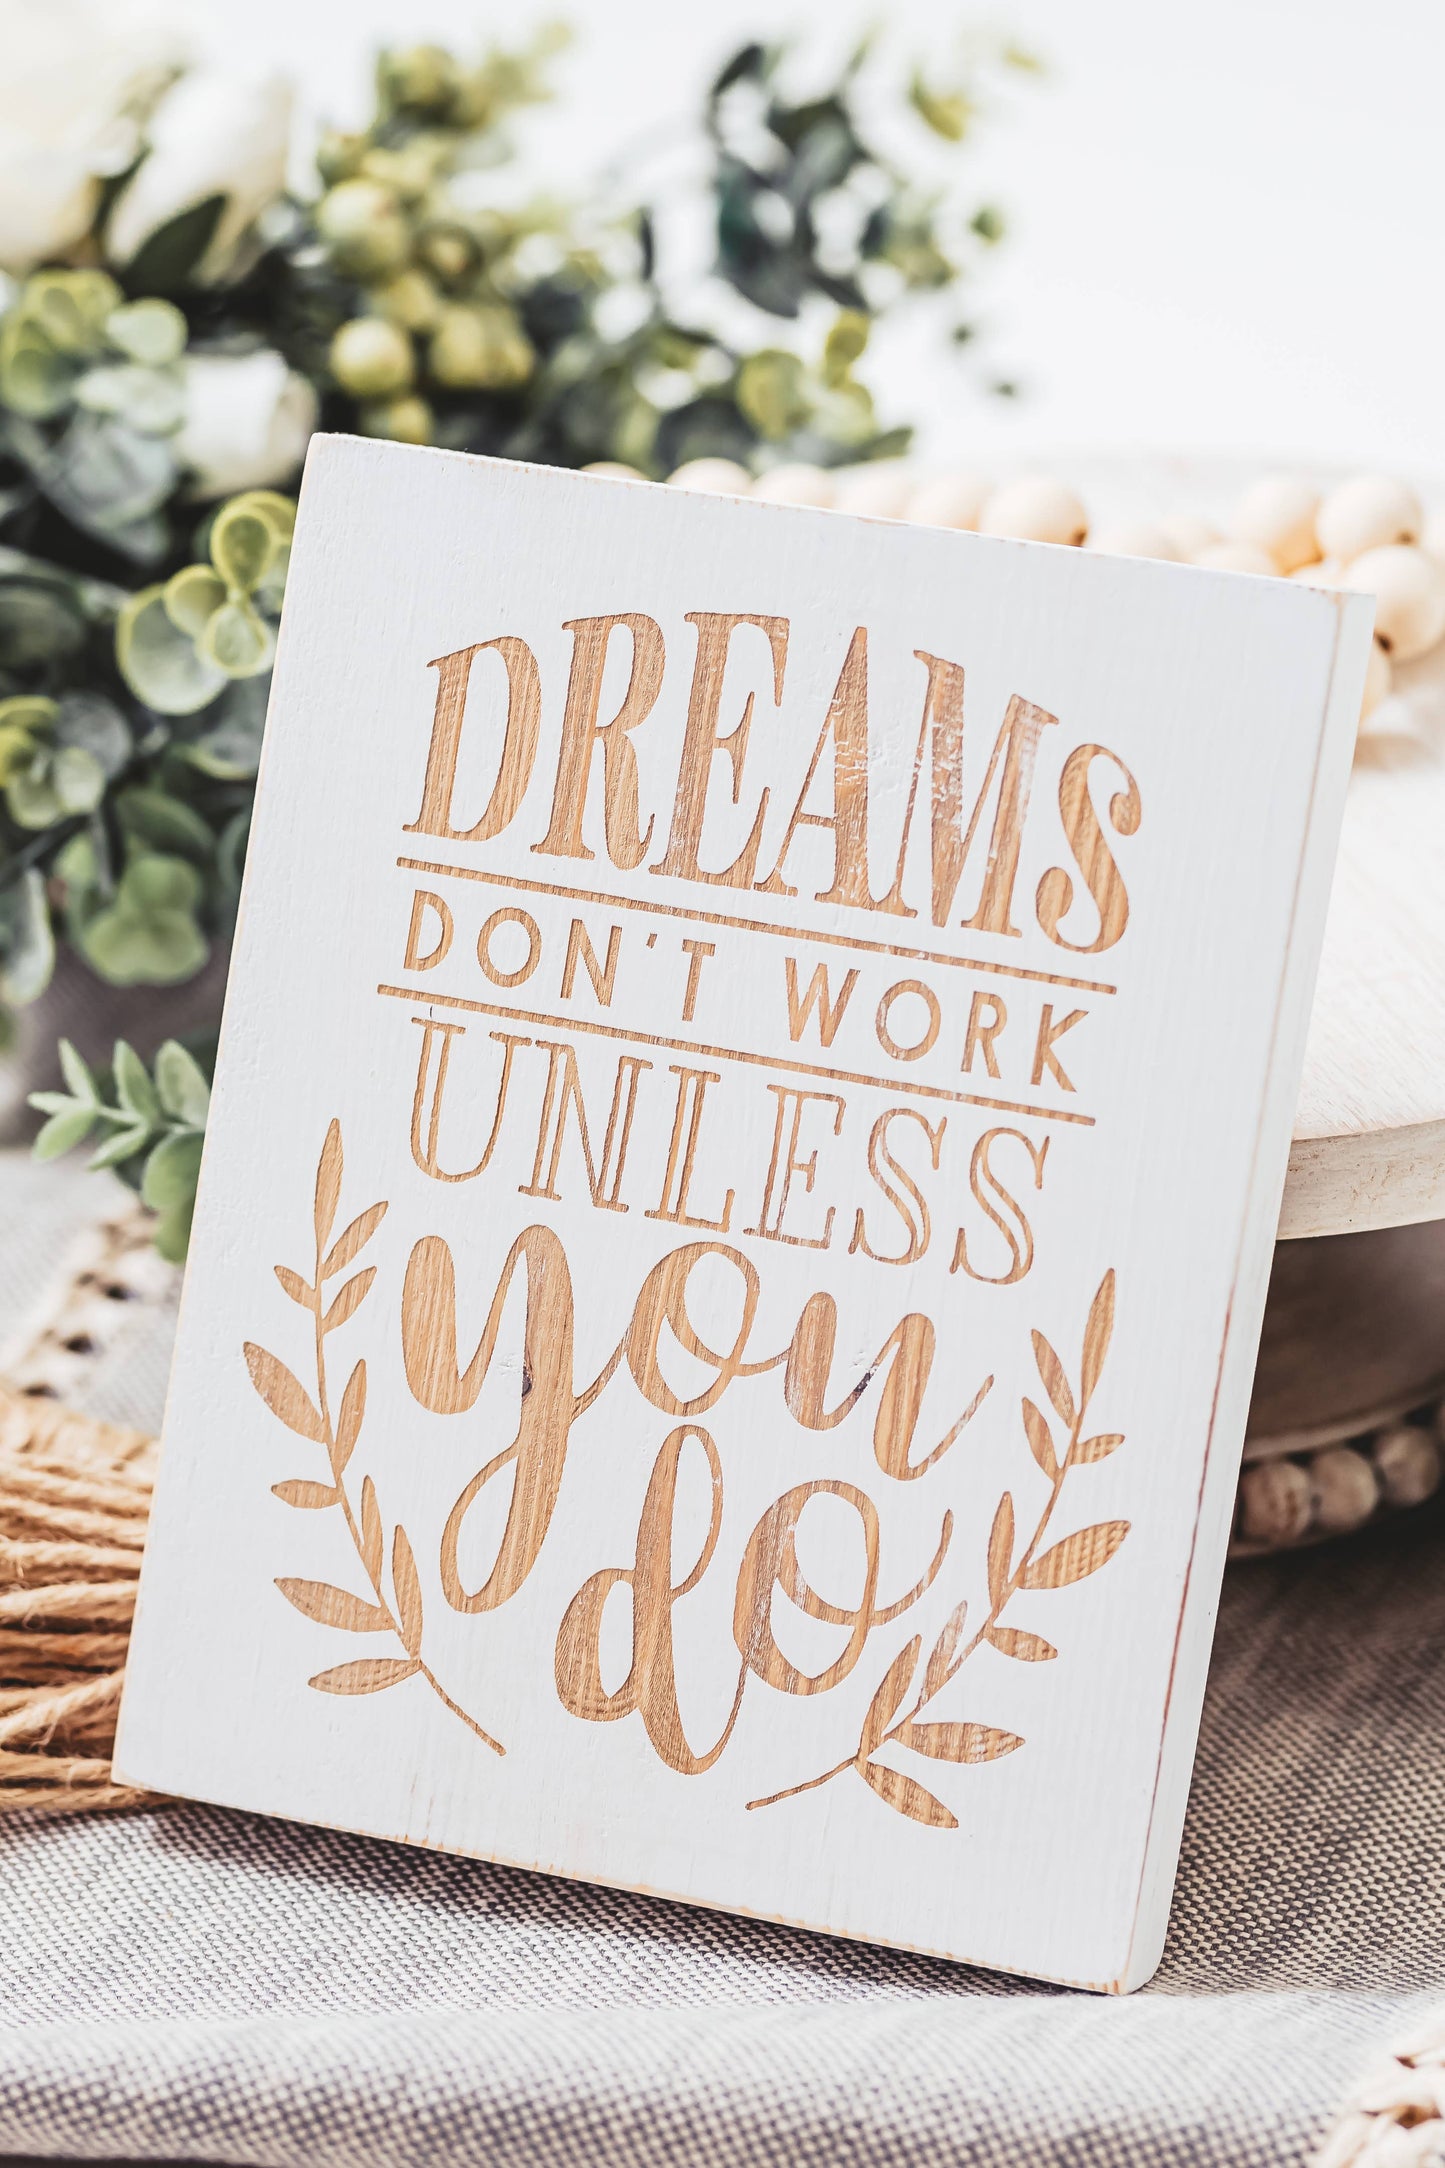 Dreams Don't Work Wall Sign